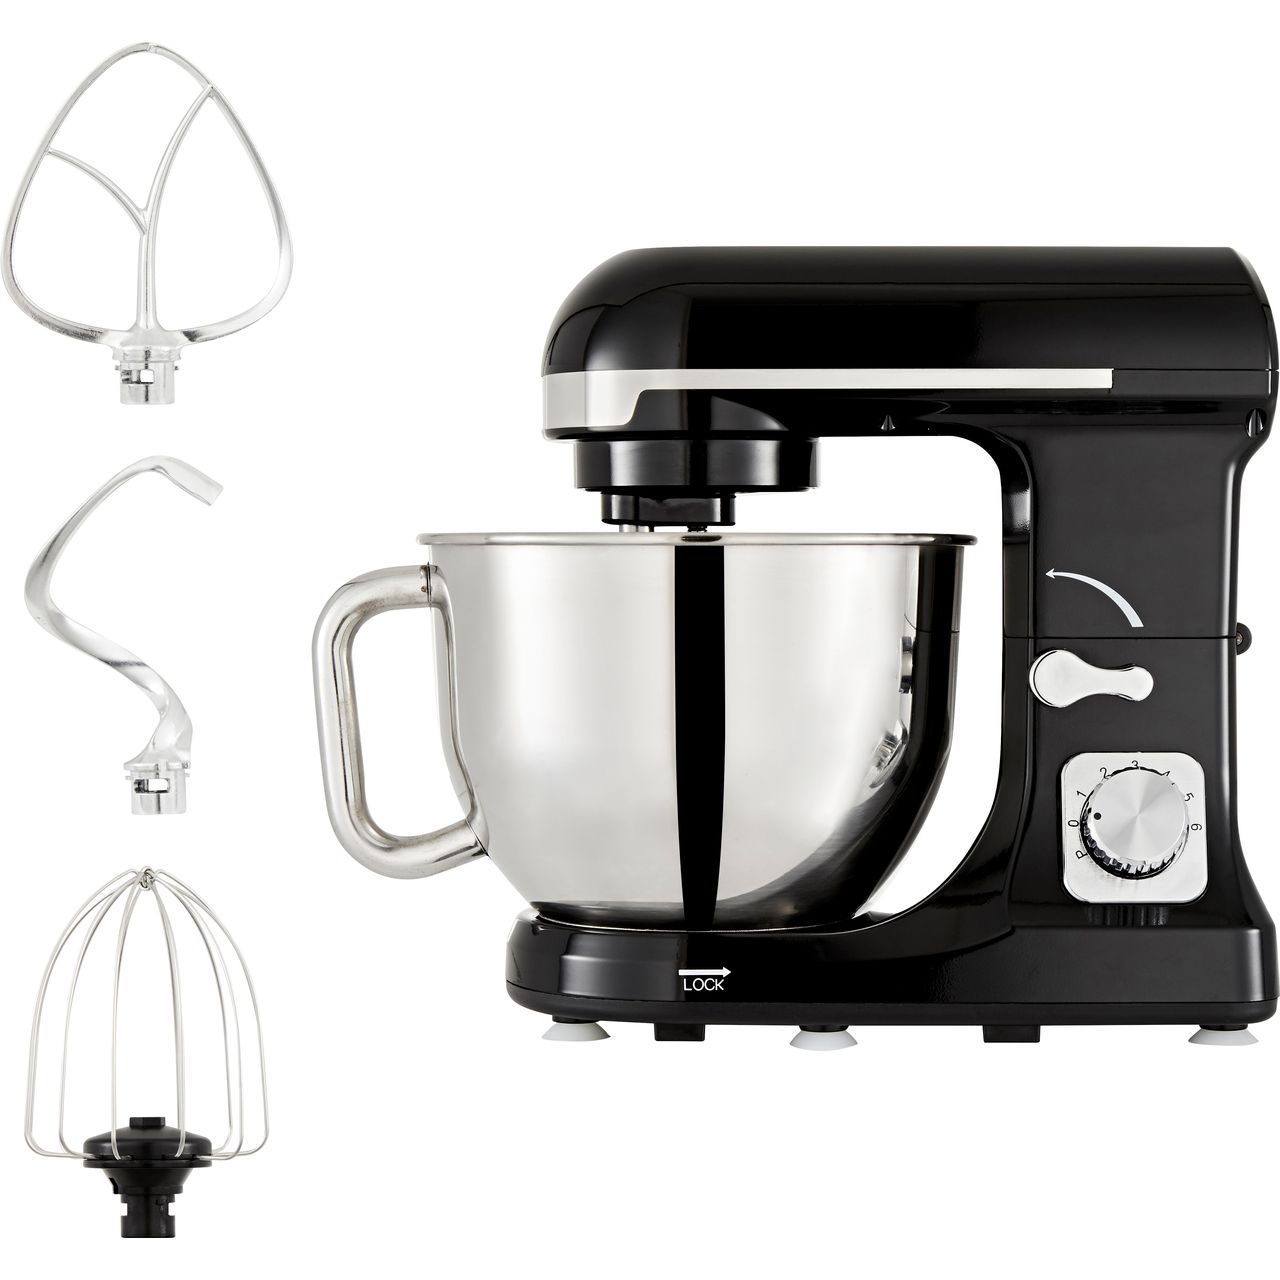 Tower T12033 Stand Mixer with 5 Litre Bowl Review